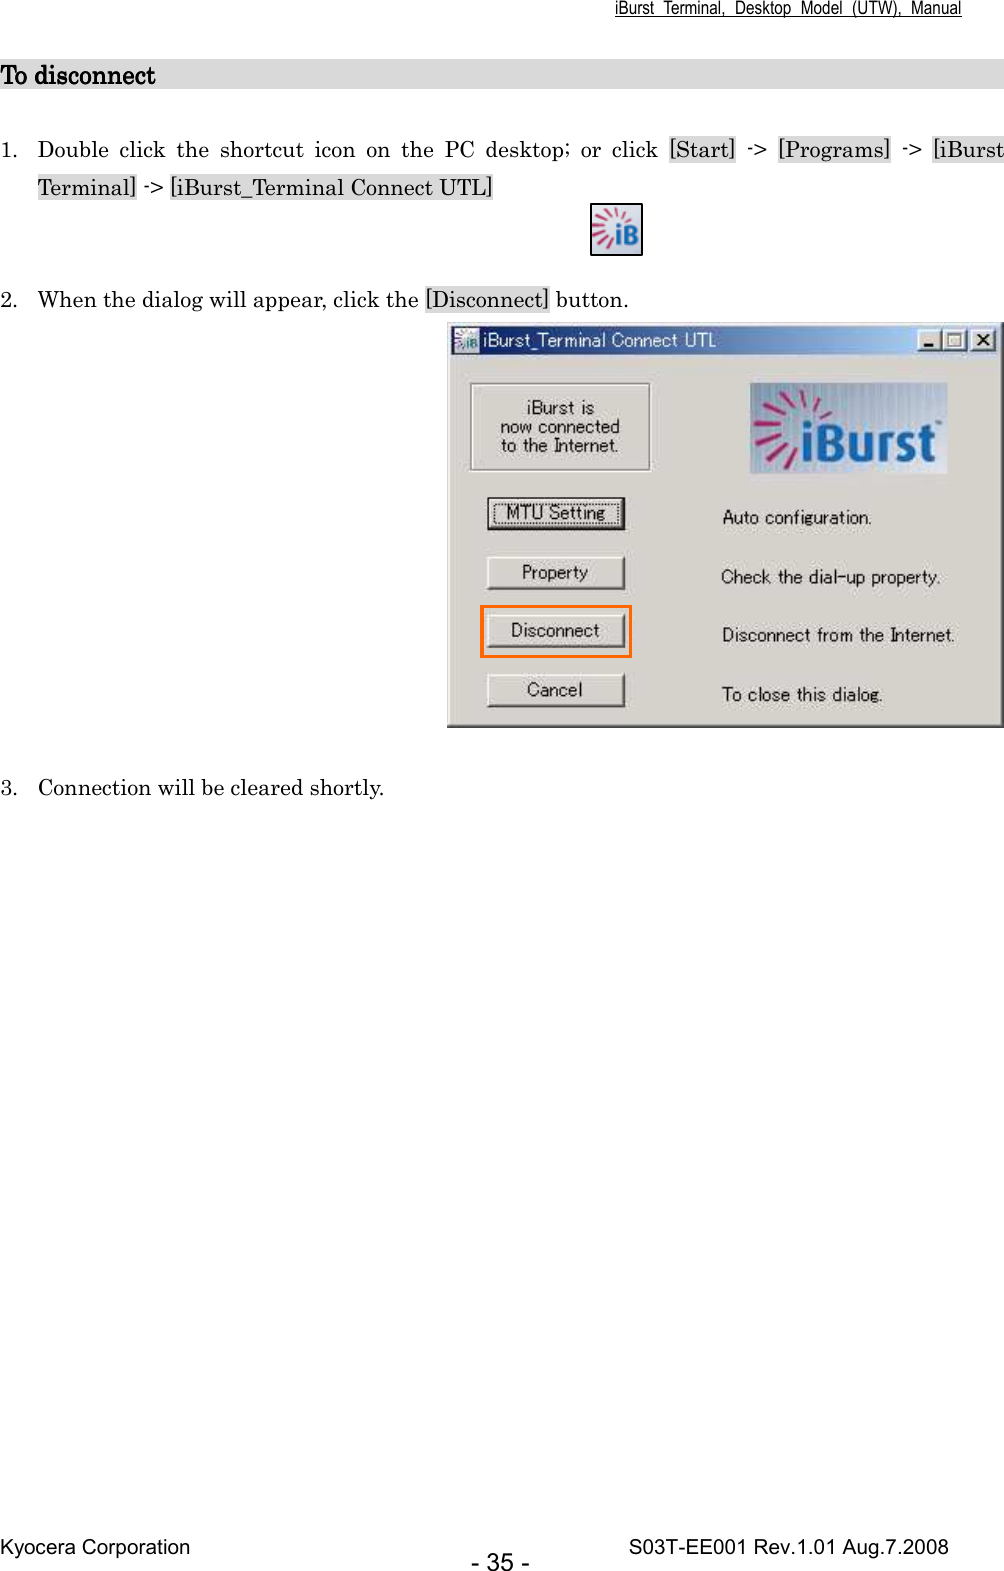 iBurst  Terminal,  Desktop  Model  (UTW),  Manual Kyocera Corporation                                                                                    S03T-EE001 Rev.1.01 Aug.7.2008 - 35 - To To To To disdisdisdisconnectconnectconnectconnect                                                                                                                                                                                                                                                                                                                                                                                                                                                                                                                                         1. Double  click  the  shortcut  icon  on  the  PC  desktop;  or  click  [Start]  -&gt;  [Programs]  -&gt;  [iBurst Terminal] -&gt; [iBurst_Terminal Connect UTL]   2. When the dialog will appear, click the [Disconnect] button.   3. Connection will be cleared shortly.   